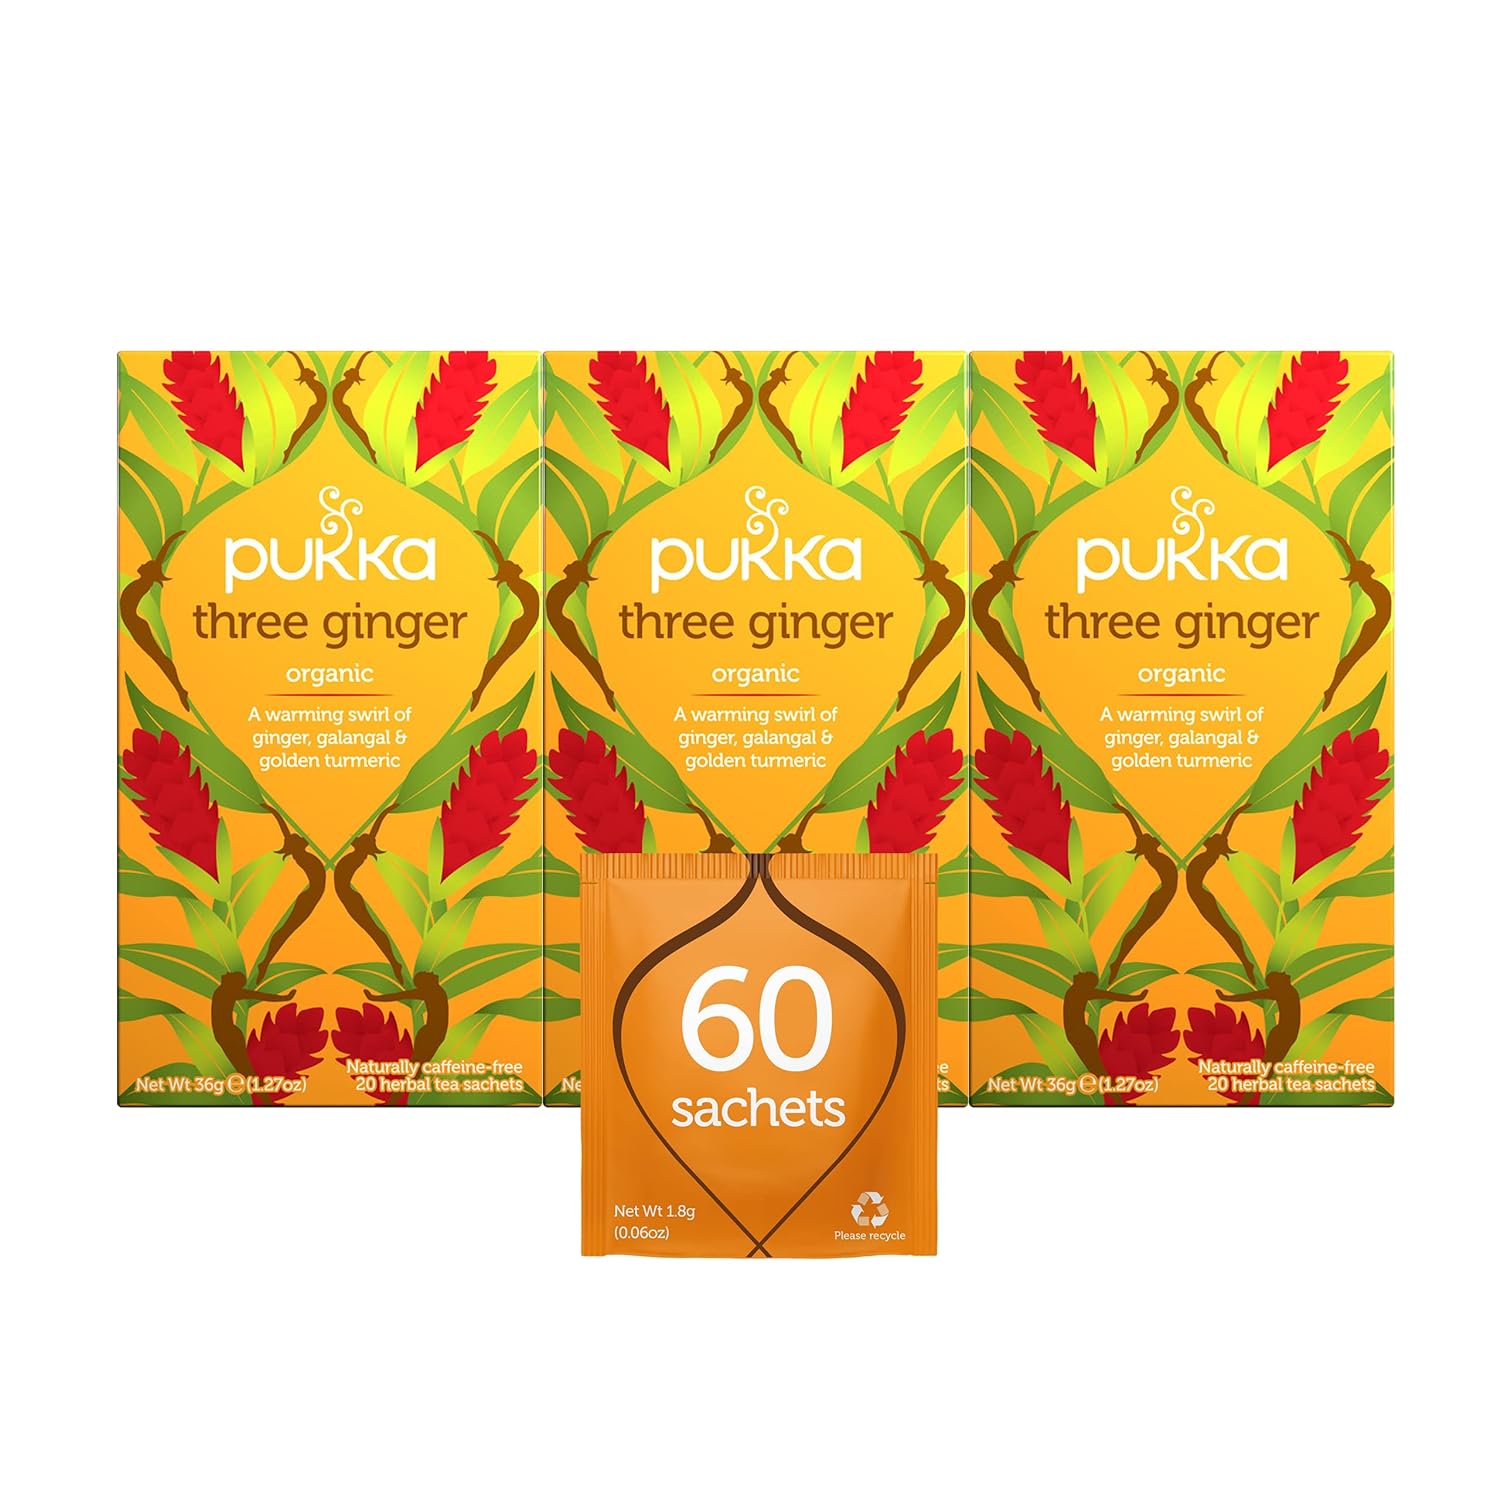 Pukka Three Ginger, Organic Herbal Tea With Turmeric & Galangal, Perfect for After Meals, 60 Tea Bags (3 Pack)